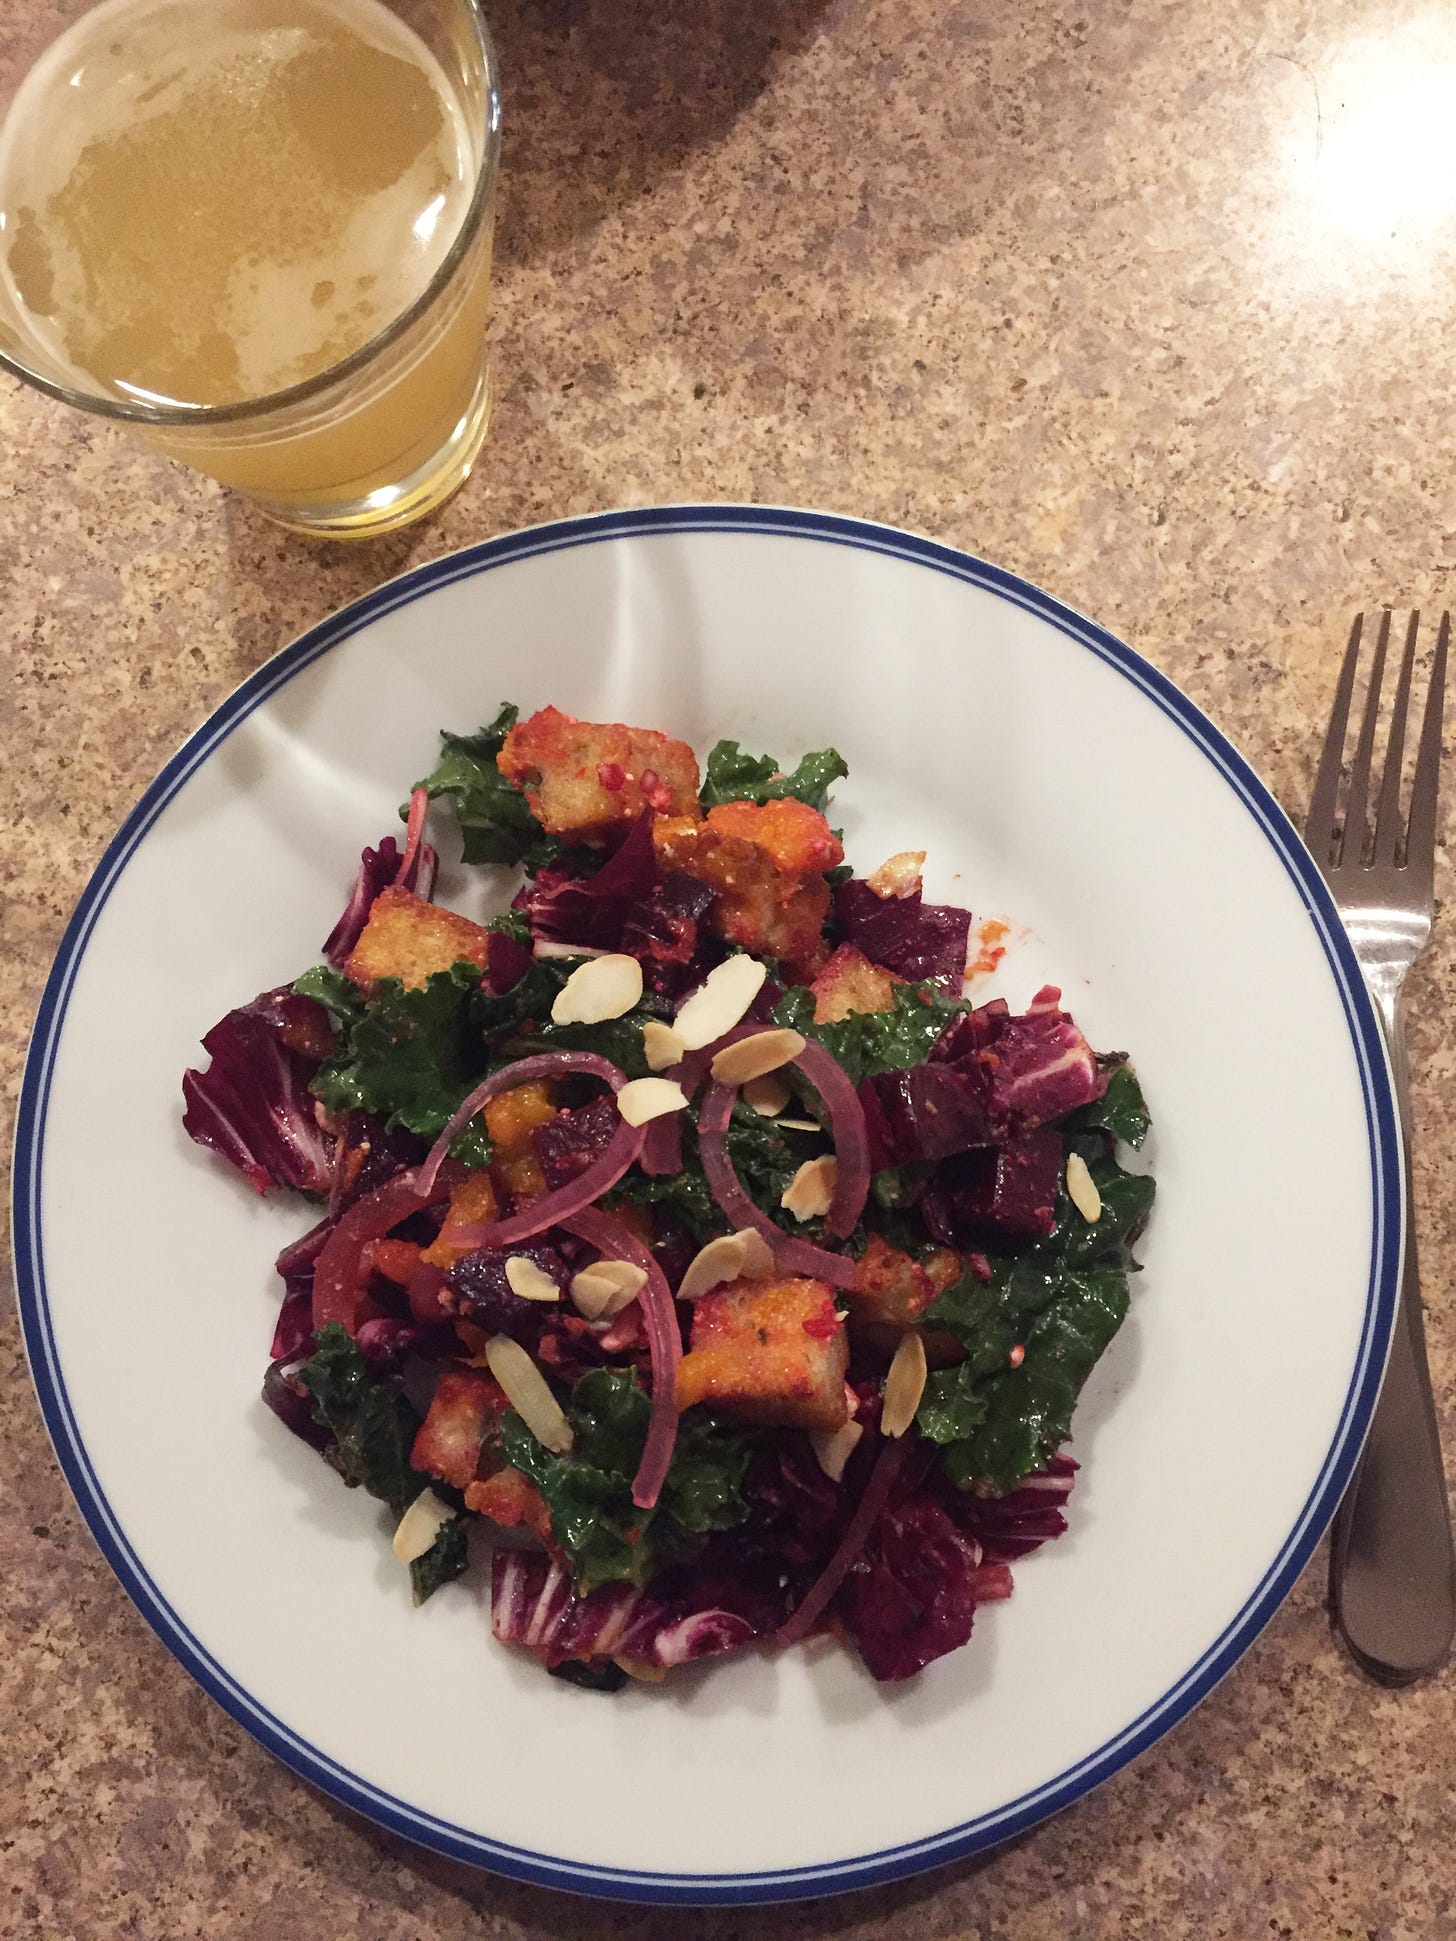 A plate of panzanella with beets and pieces of roasted squash among croutons, kale, and radicchio. On top are toasted sliced almonds and pickled red onion. A glass of beer sits to the upper left corner of the plate.